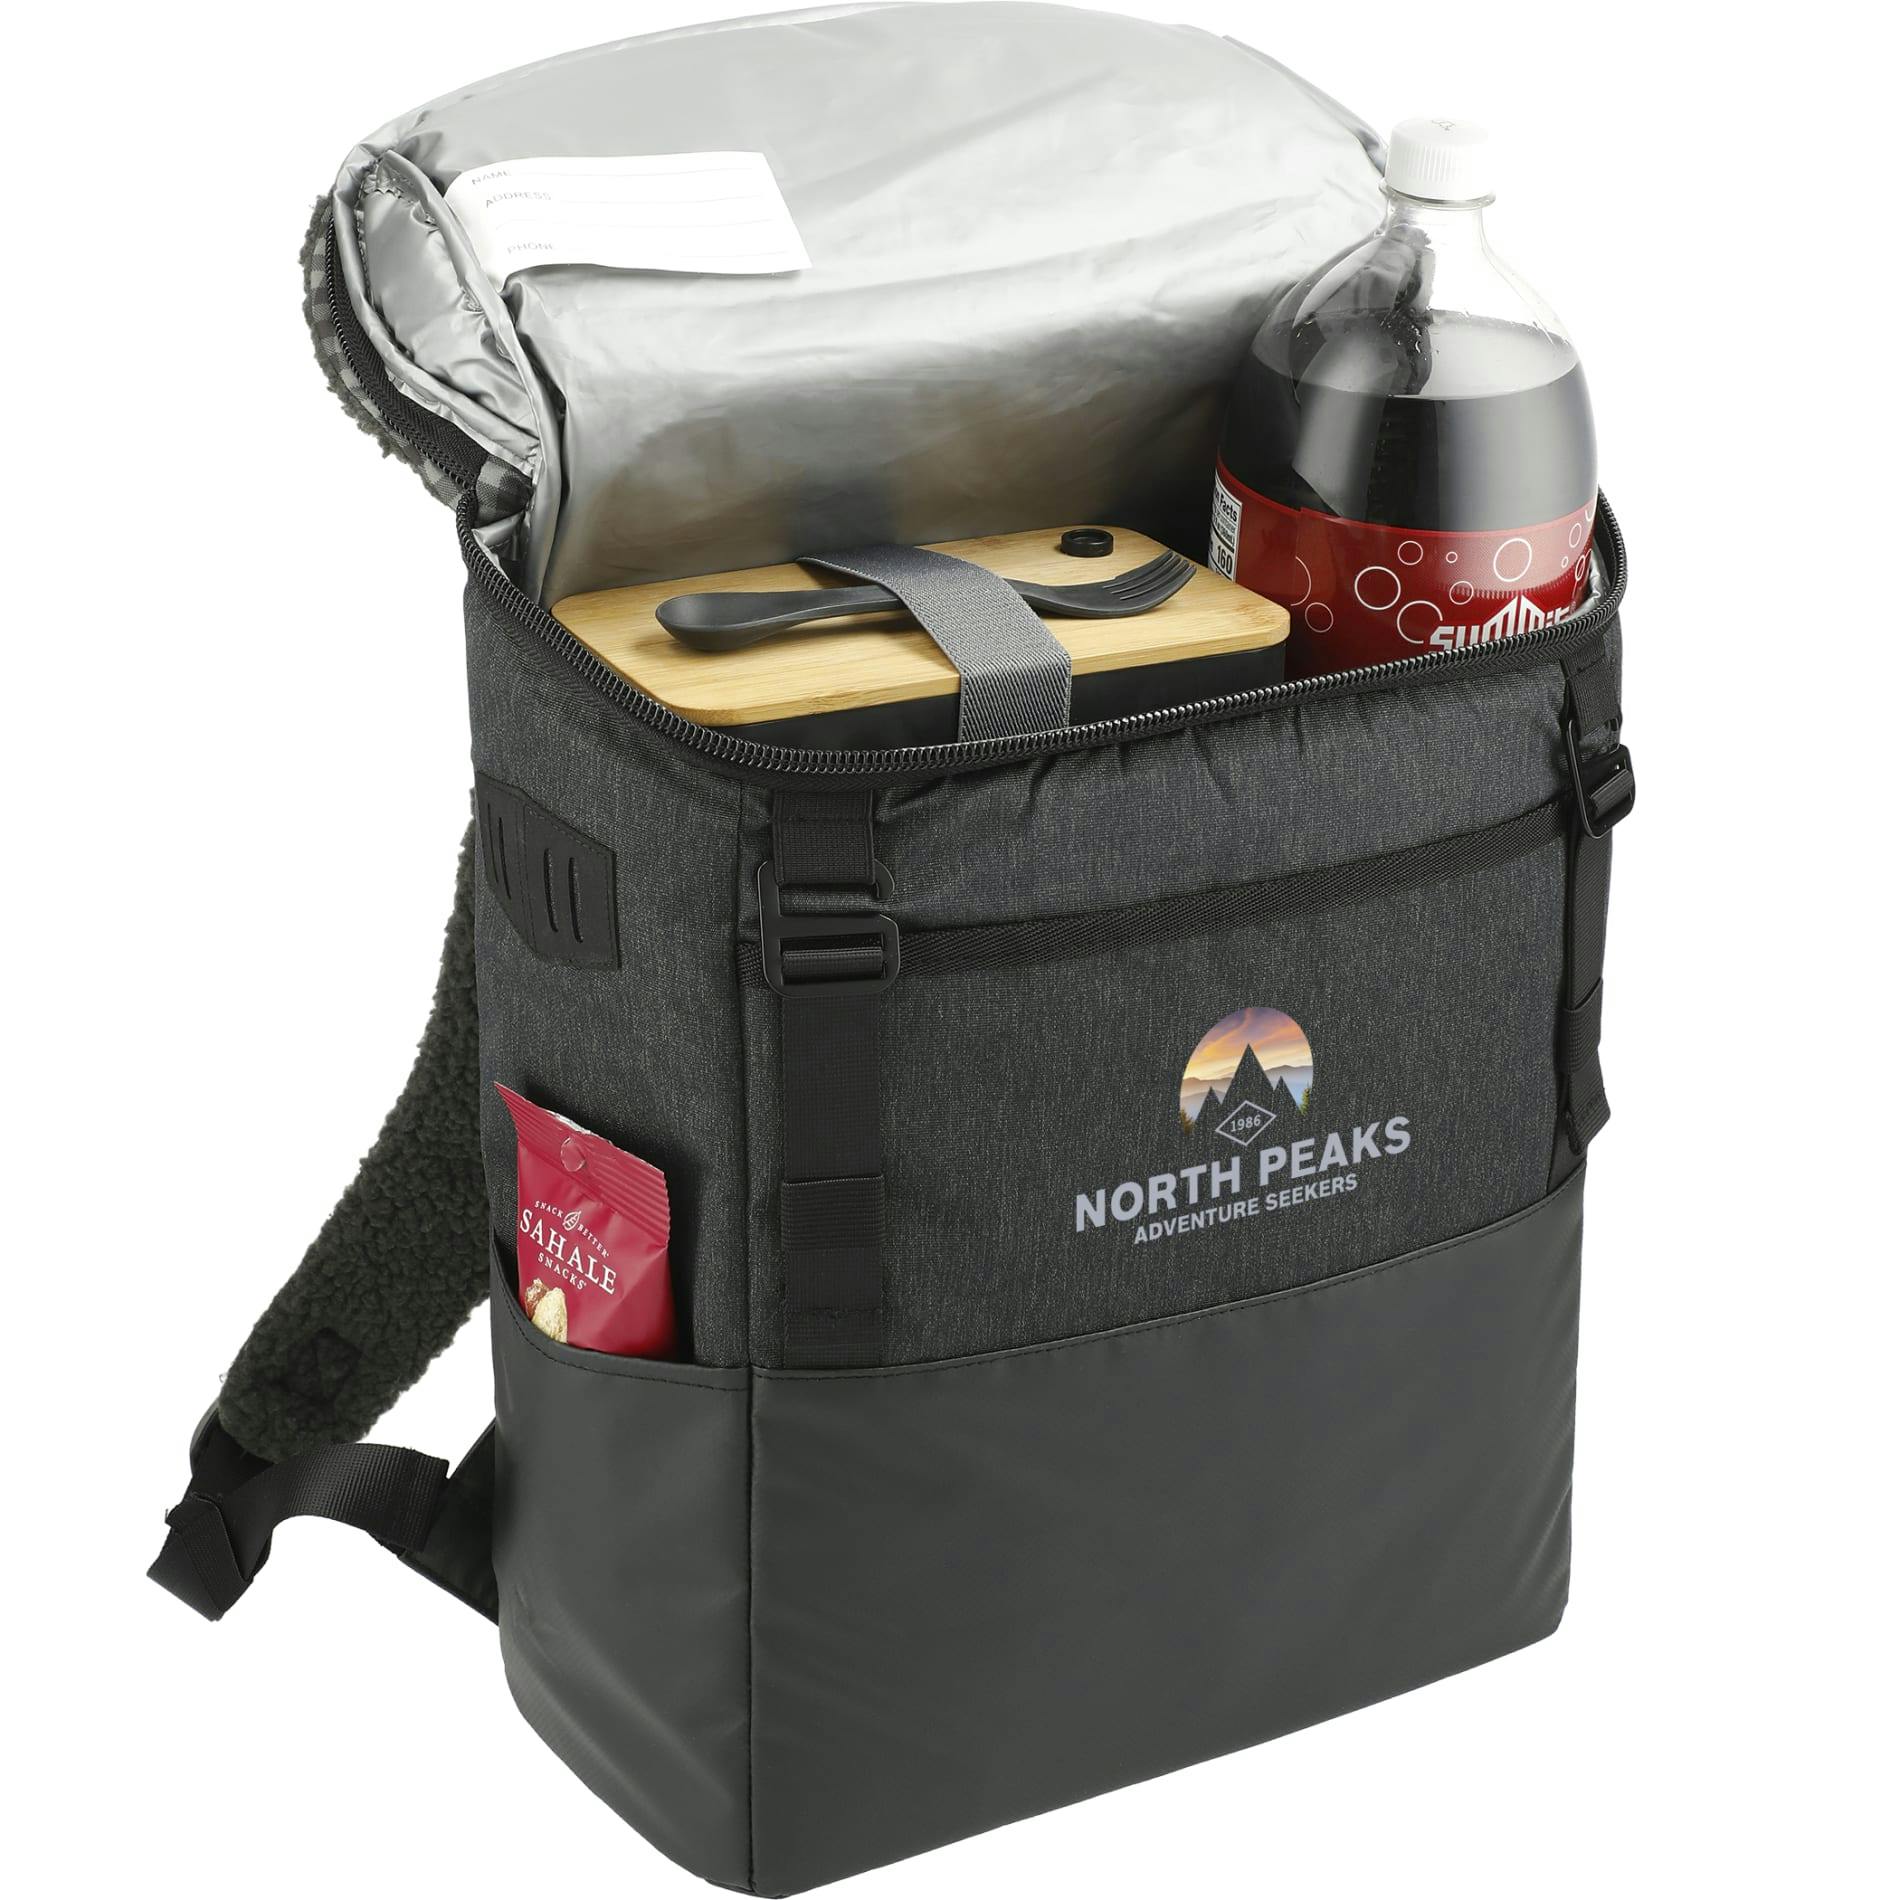 Field & Co. Fireside Eco 12 Can Backpack Cooler - additional Image 3